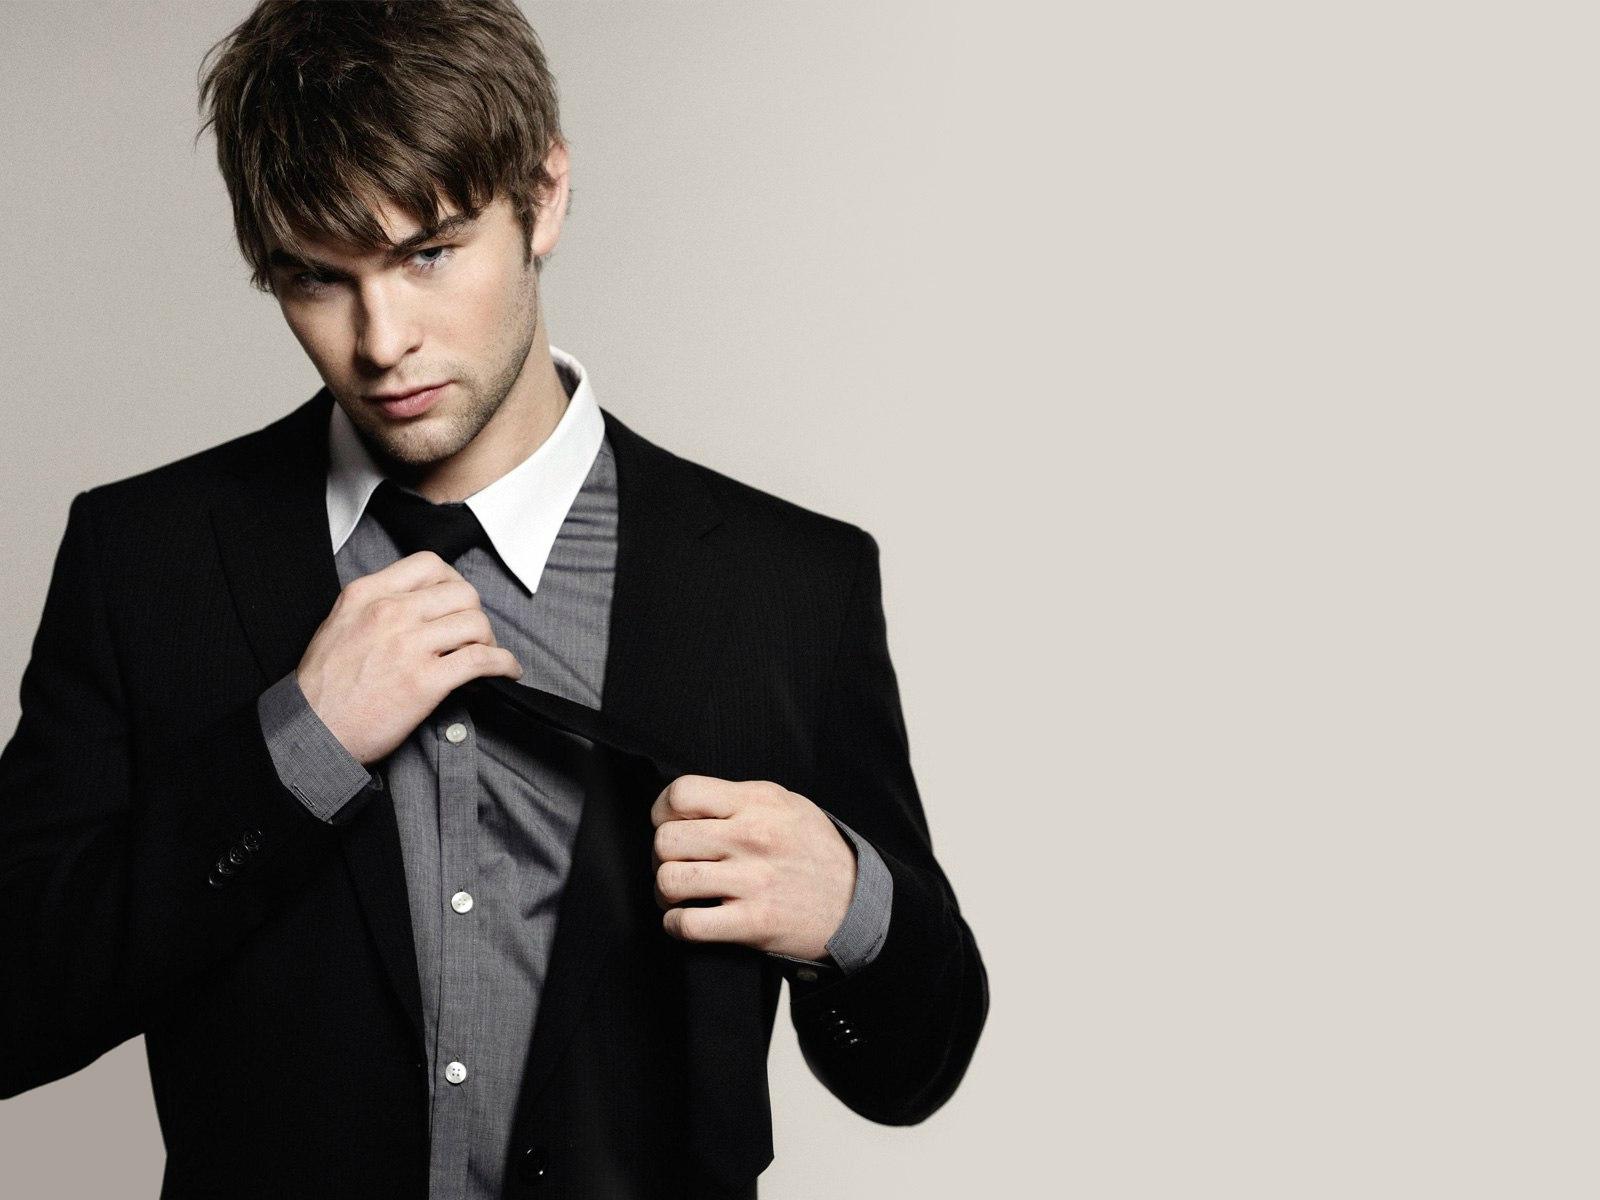 Chace Crawford HD Wallpaper For Desktop